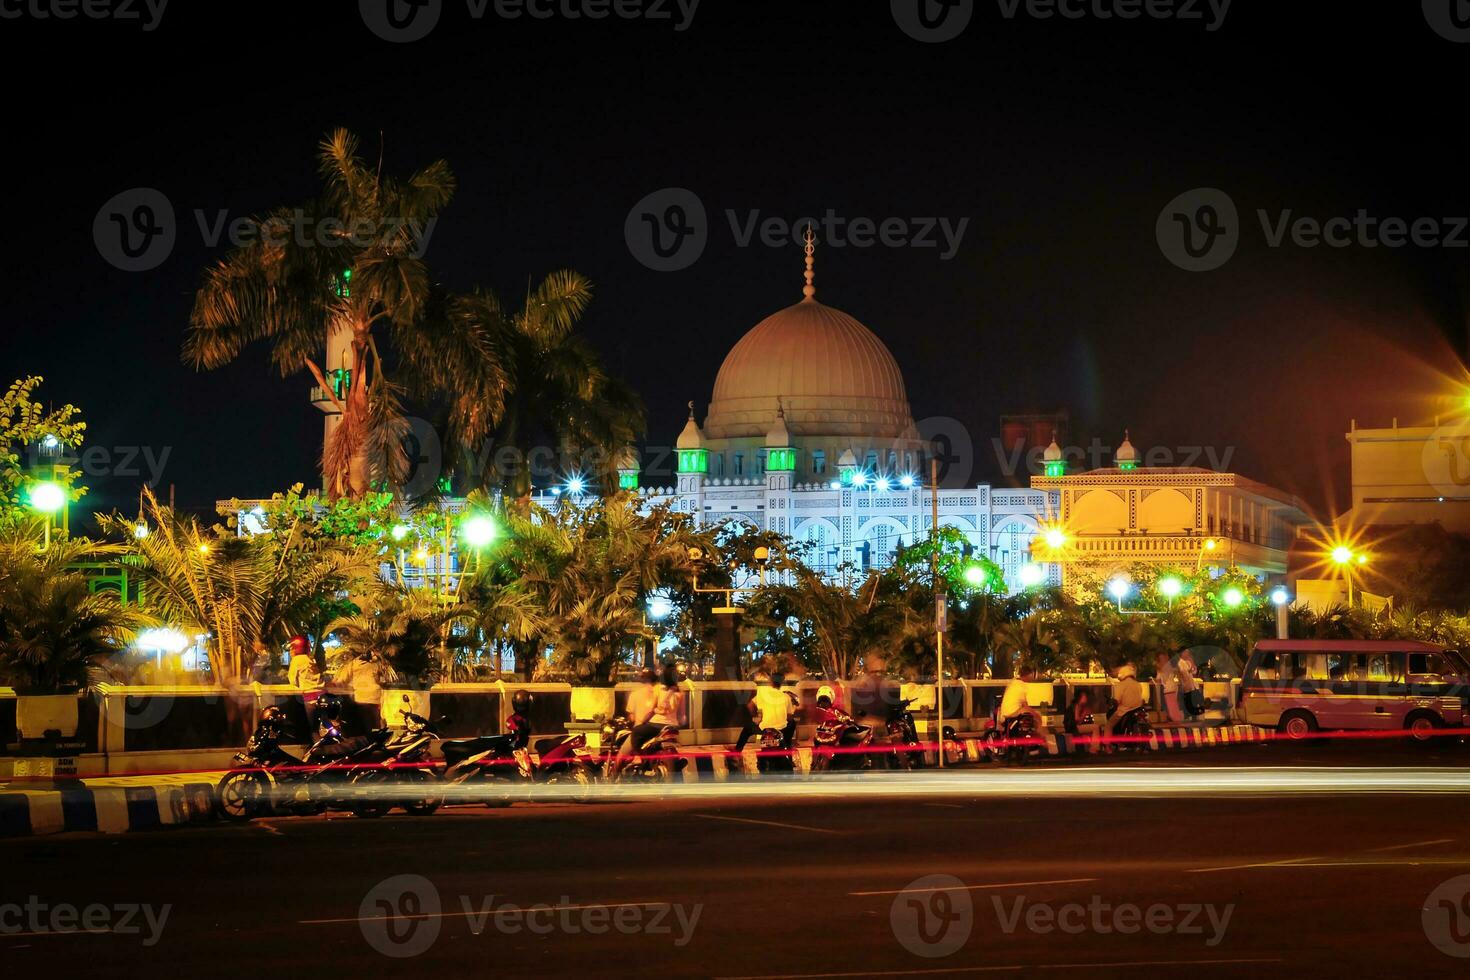 The Jami Mosque in the night photo is the single largest place of worship in the city of Pasuruan, Indonesia